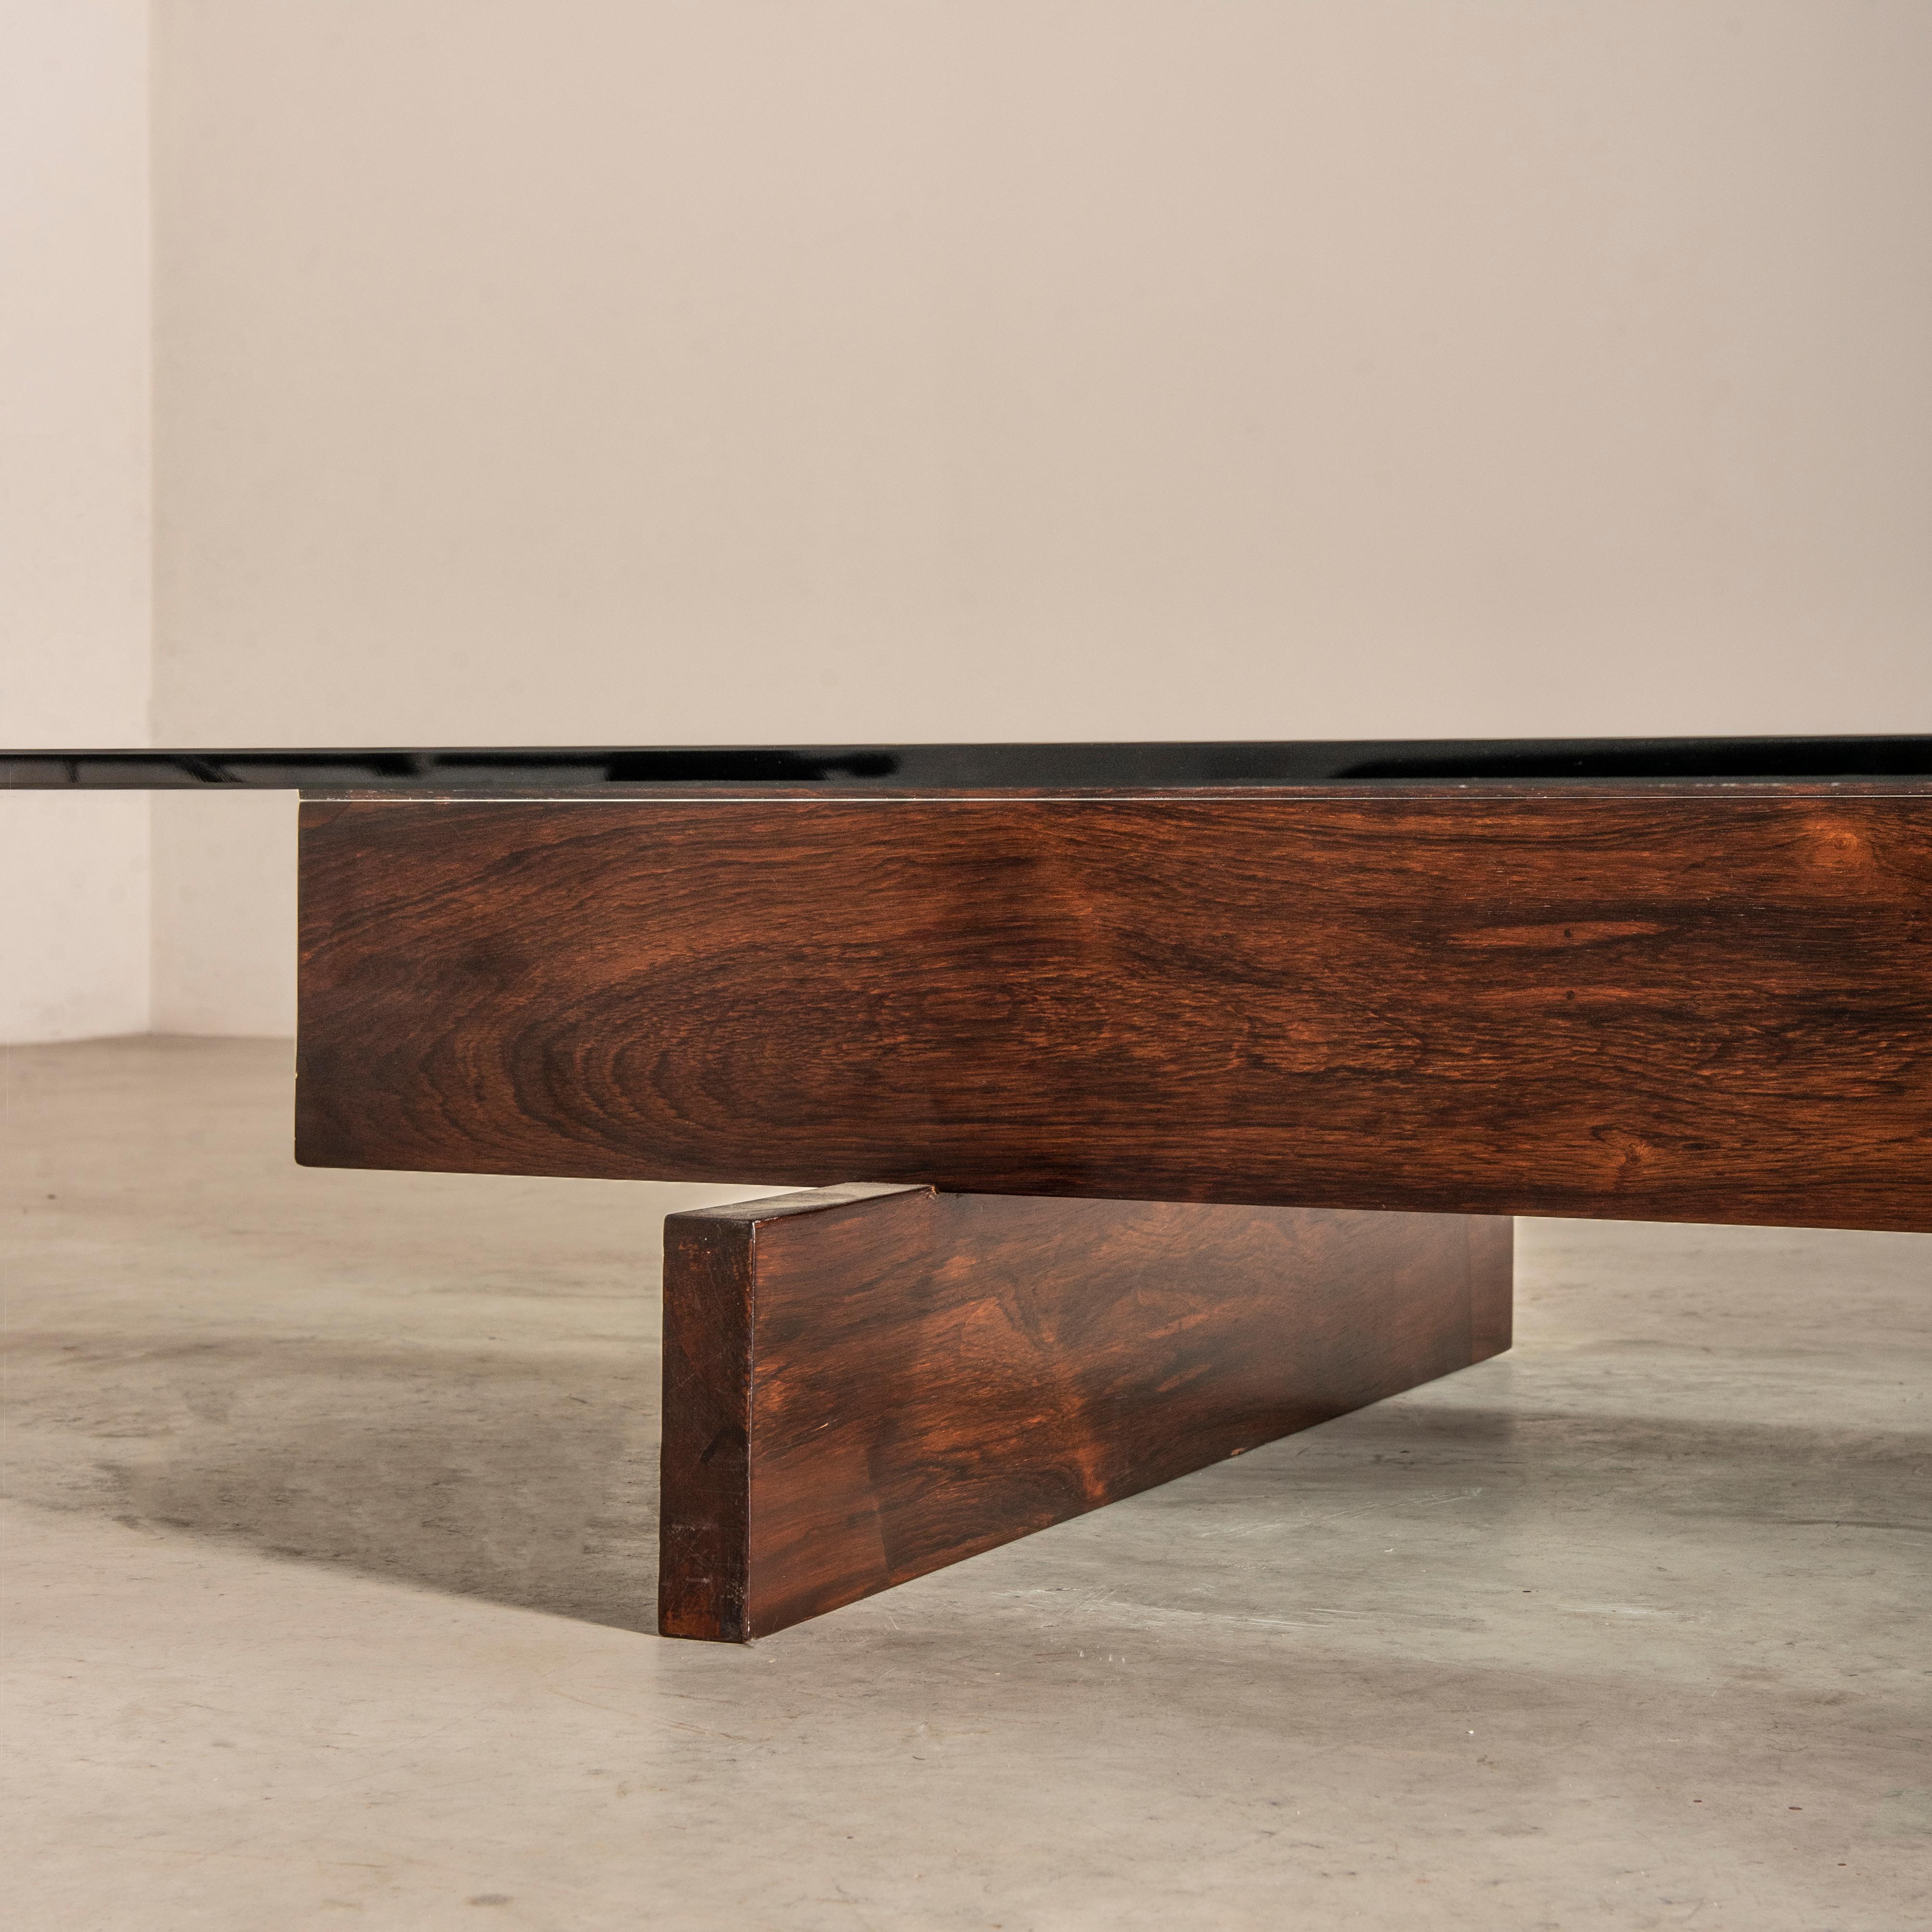 Grand Coffee Table in Wood and Glass by Celina Decorações, Brazilian Midcentury For Sale 2